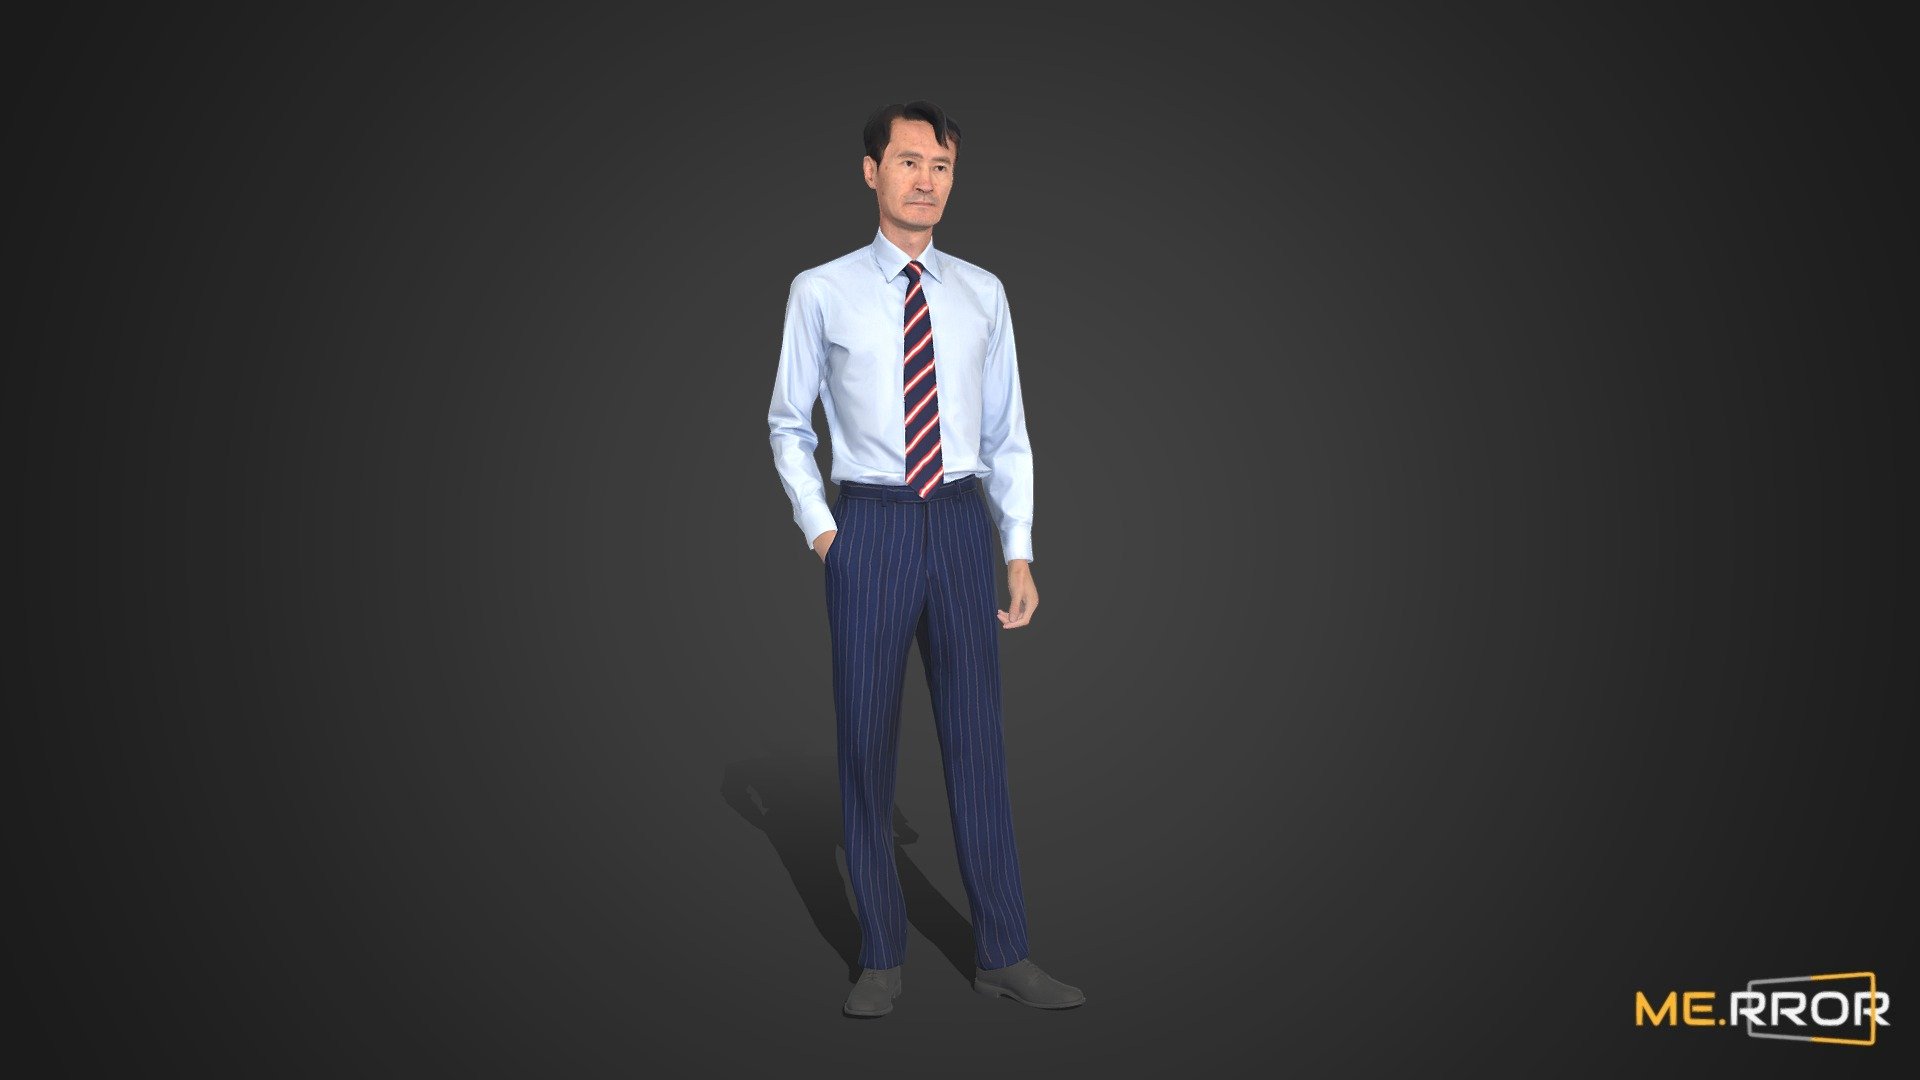 ME.RROR


From 3D models of Asian individuals to a fresh selection of free assets available each month - explore a richer diversity of photorealistic 3D assets at the ME.RROR asset store!
https://me-rror.com/store




[Model Info]




Model Formats : FBX,MAX

Texture Maps (8K) : Diffuse

You can buy this model at https://me-rror.com/asset/human/asset870




Find Scanned - 2M poly version here:https://sketchfab.com/3d-models/asian-man-scan-posed-11-2m-poly-b52e073cf44146ad947d9b63f26e3743

Find the topologized version here:https://sketchfab.com/3d-models/game-ready-asian-man-scan-posed-11-7602cc25243e4b4bb1aeec88c5a512f7

If you encounter any problems using this model, please feel free to contact us. We'd be glad to help you.



[About ME.RROR]

Step into the future with ME.RROR, South Korea's leading 3D specialist. Bespoke creations are not just possible; they are our specialty.

Service areas:




3D scanning

3D modeling

Virtual human creation

Inquiries: https://merror.channel.io/lounge - Asian Man Scan_Posed 11 30k poly - 3D model by ME.RROR Studio (@merror) 3d model